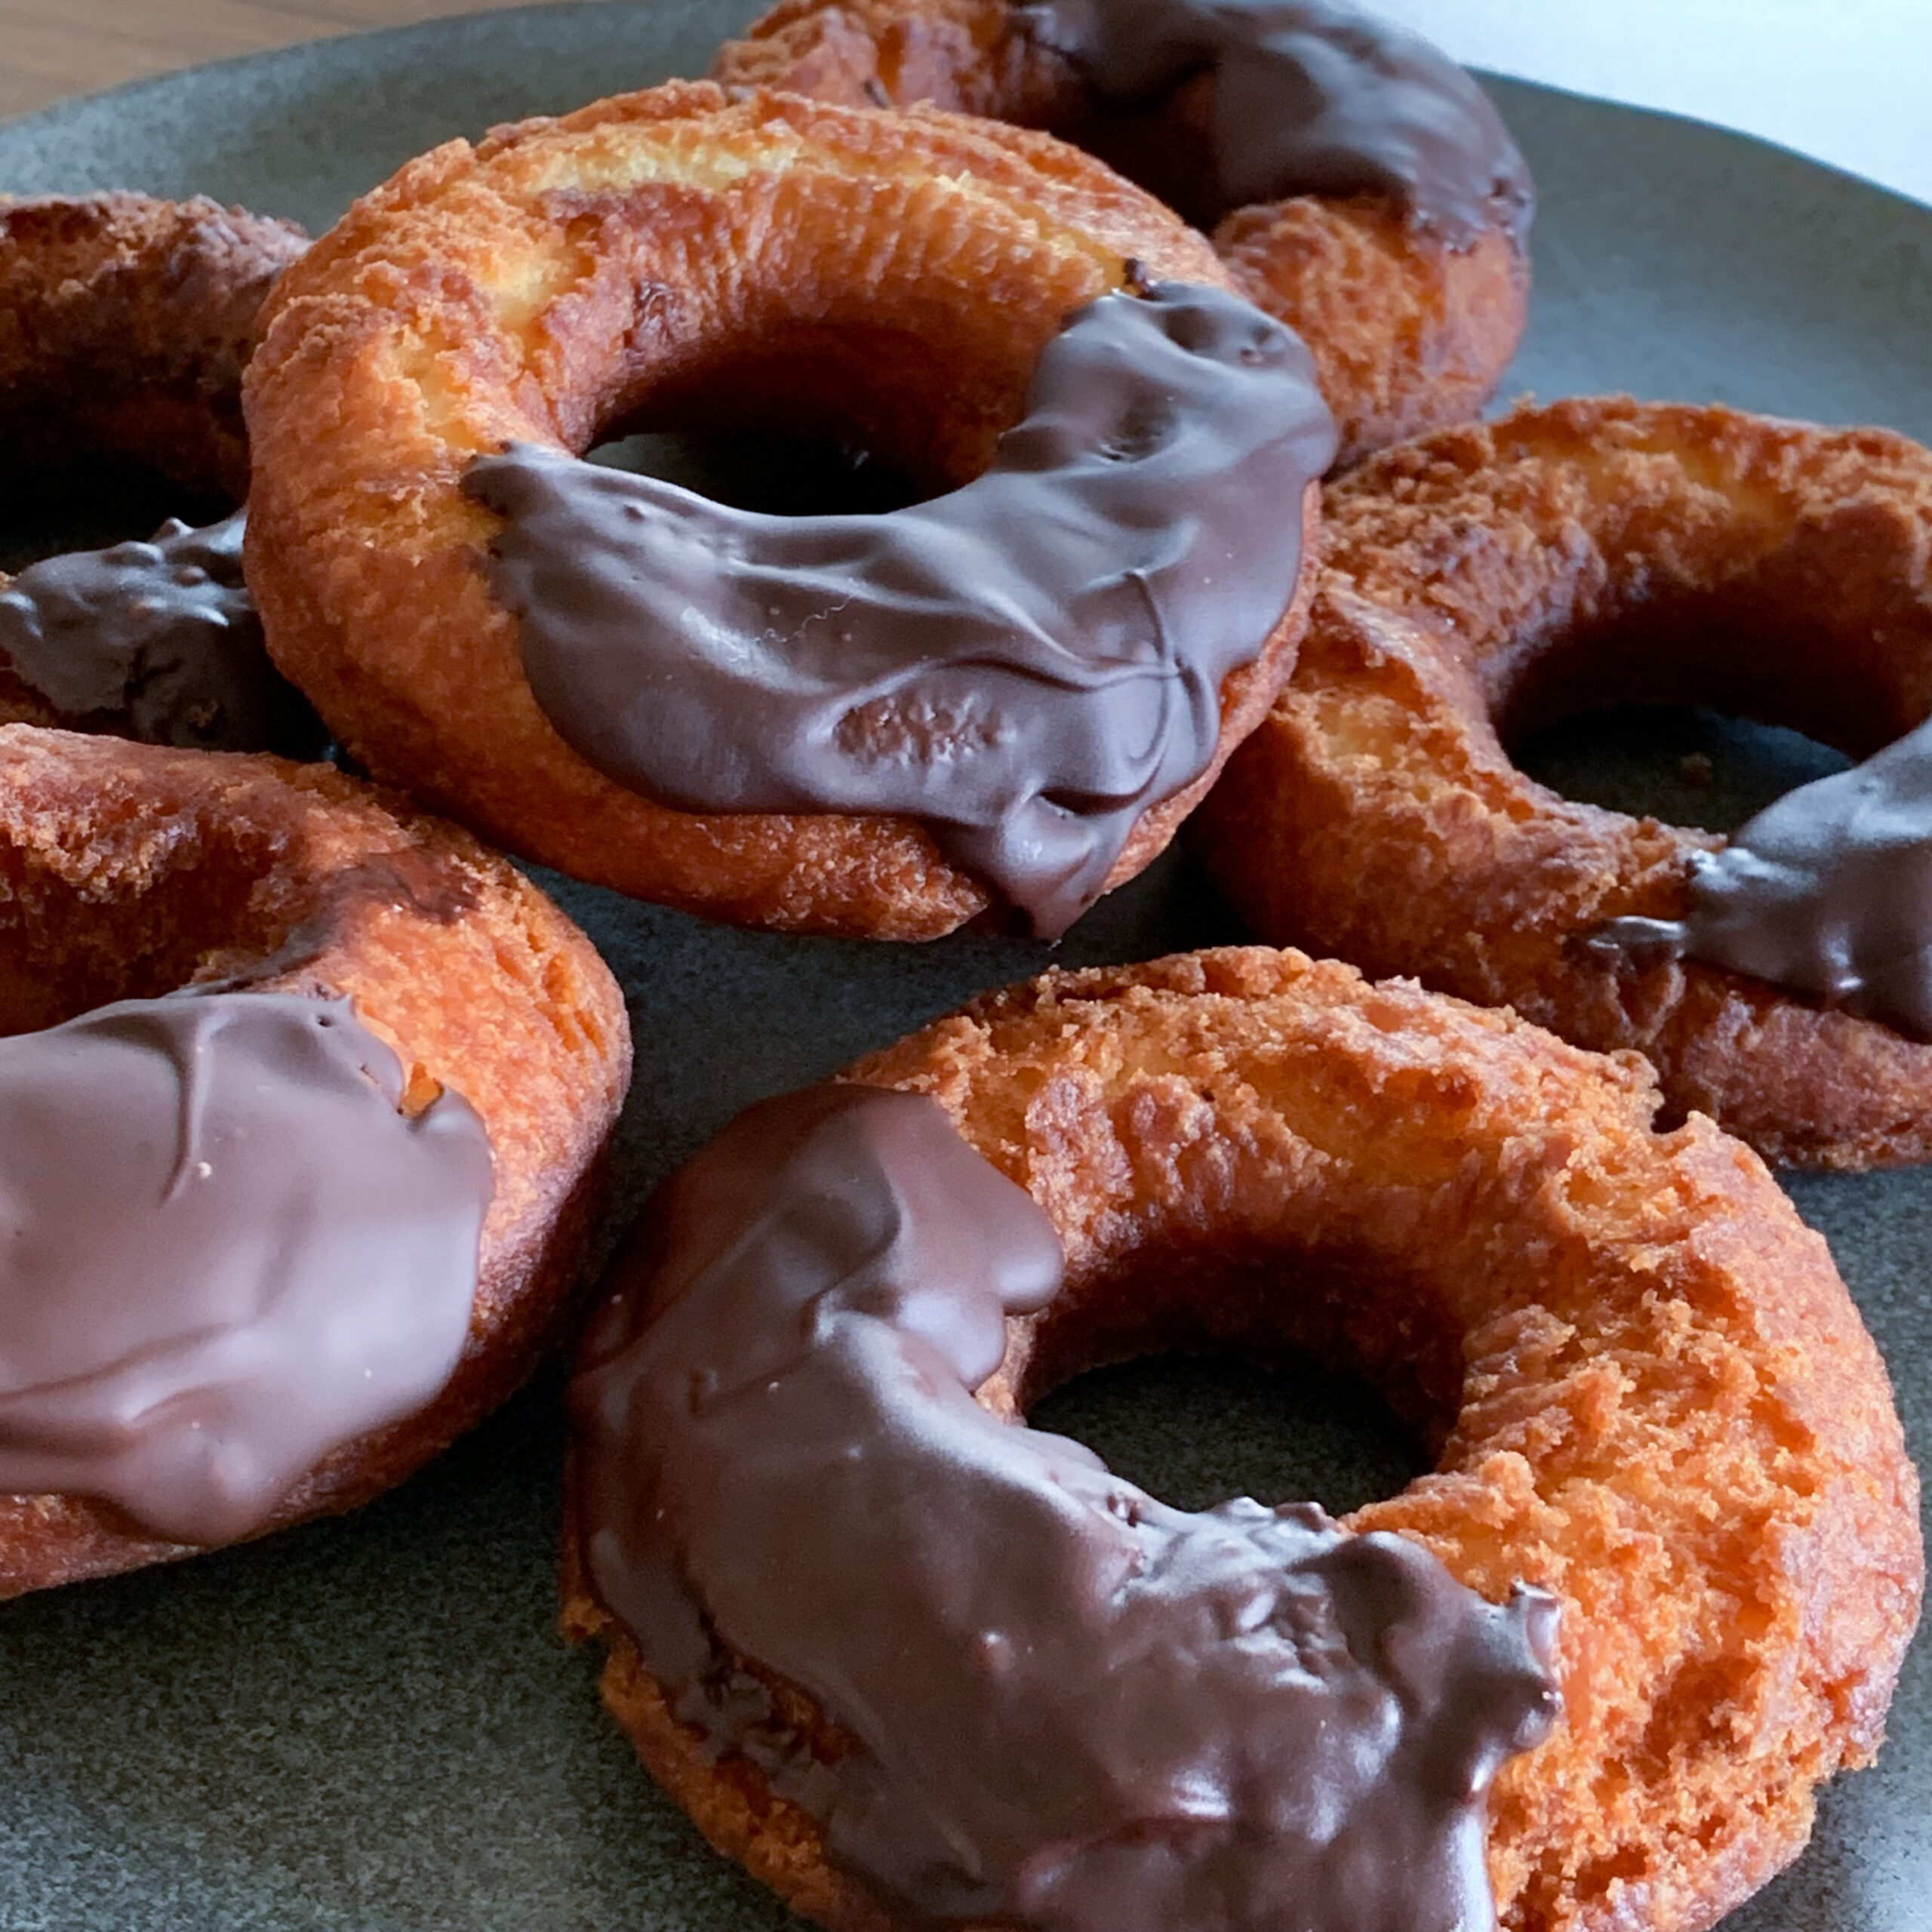 This is a donut recipe made using pancake mix.